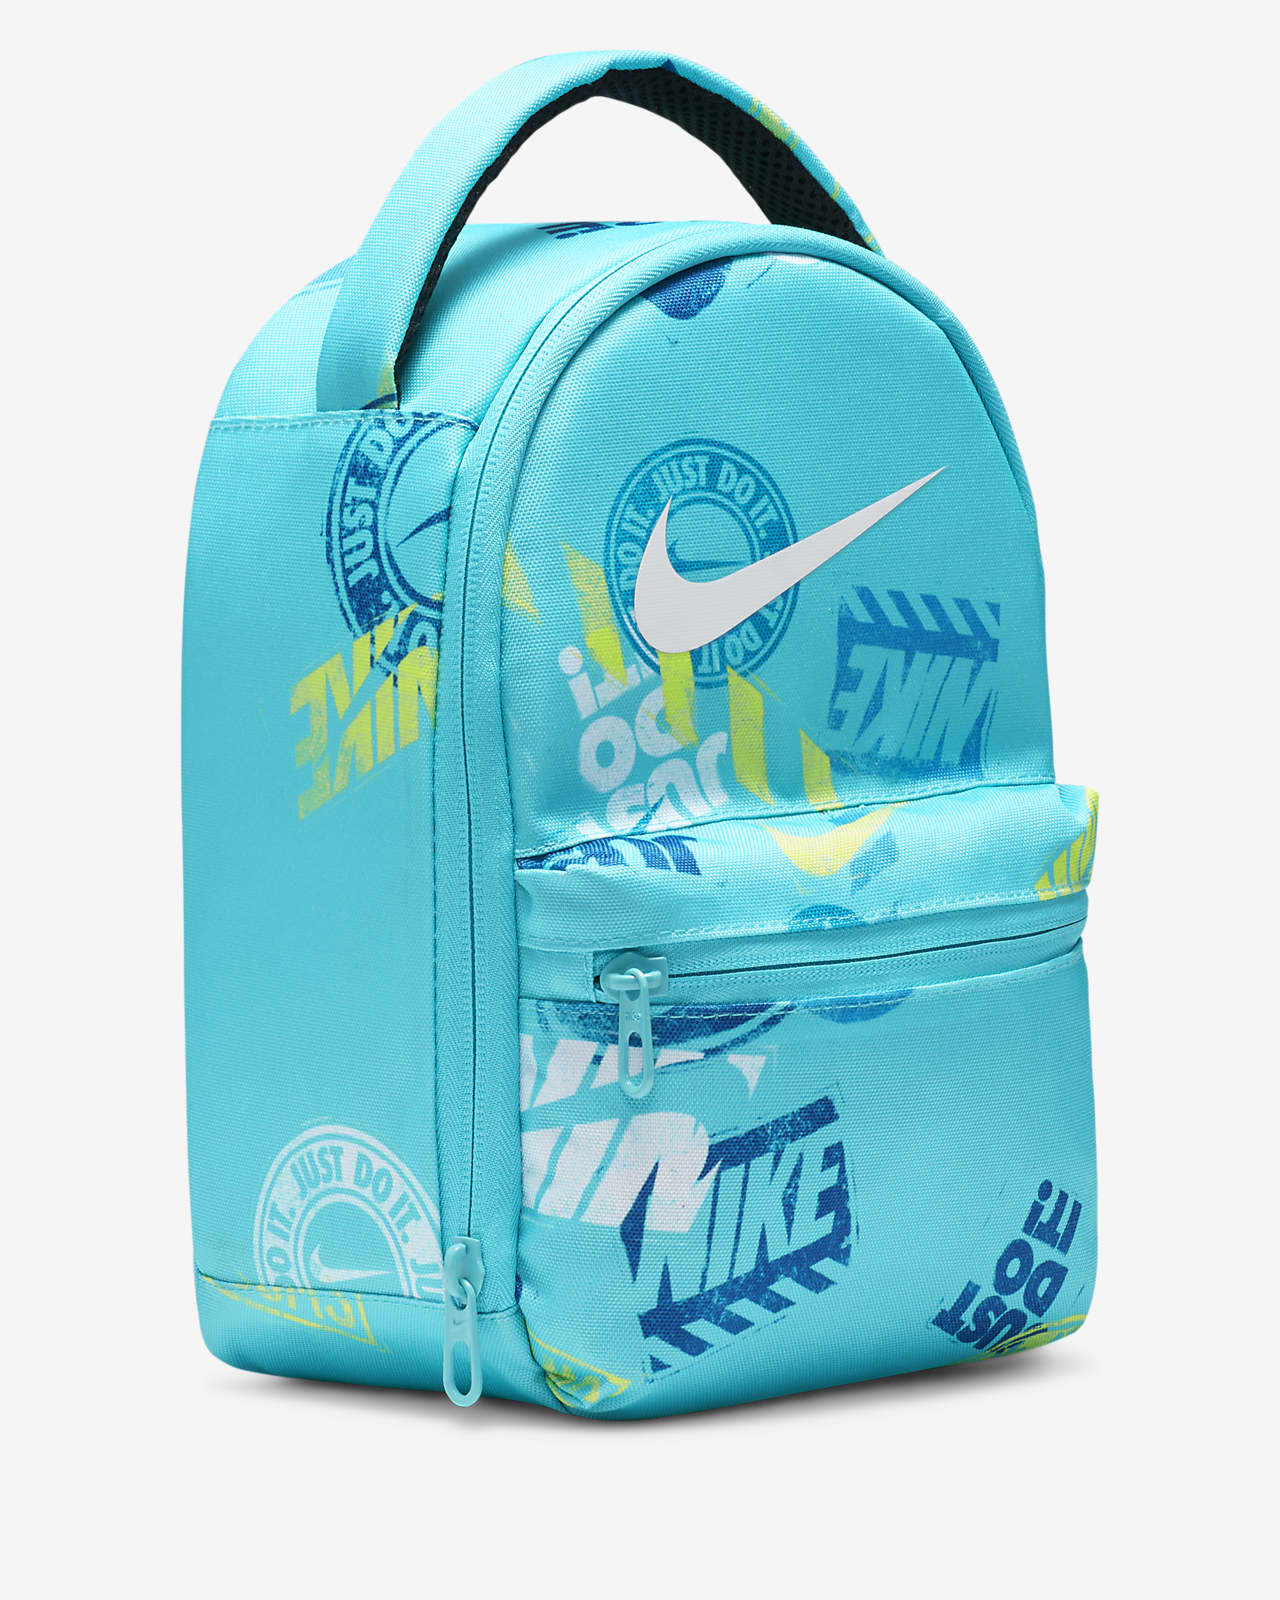 Nike Brasilia Fuel Insulated Lunch Pack